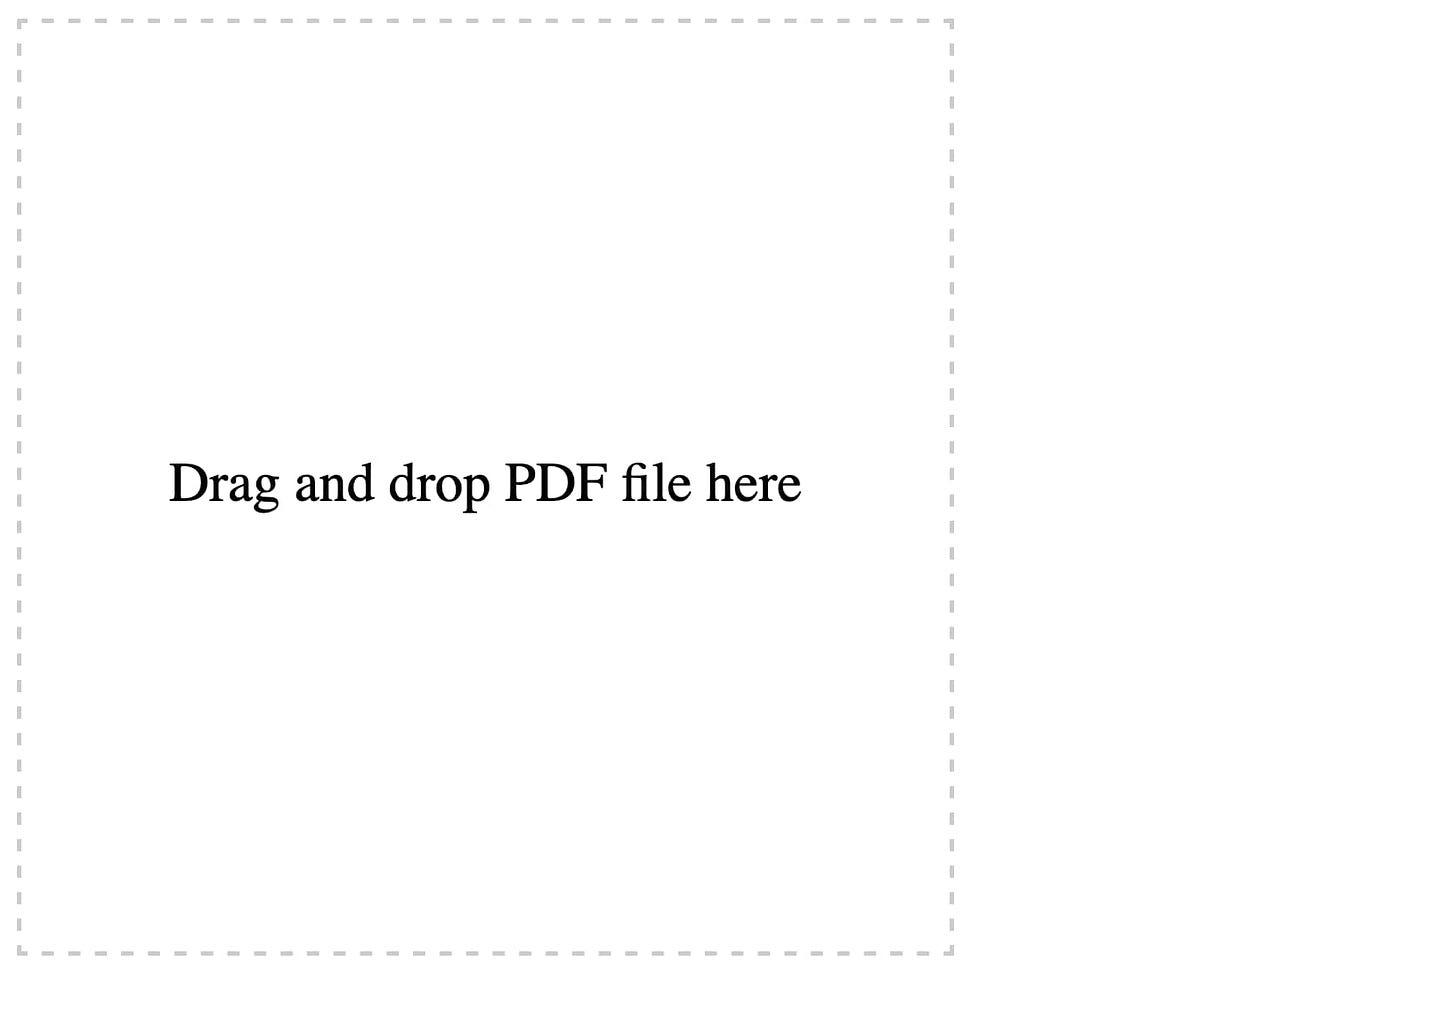 A square dotted border around the text Drag and drop PDF file here